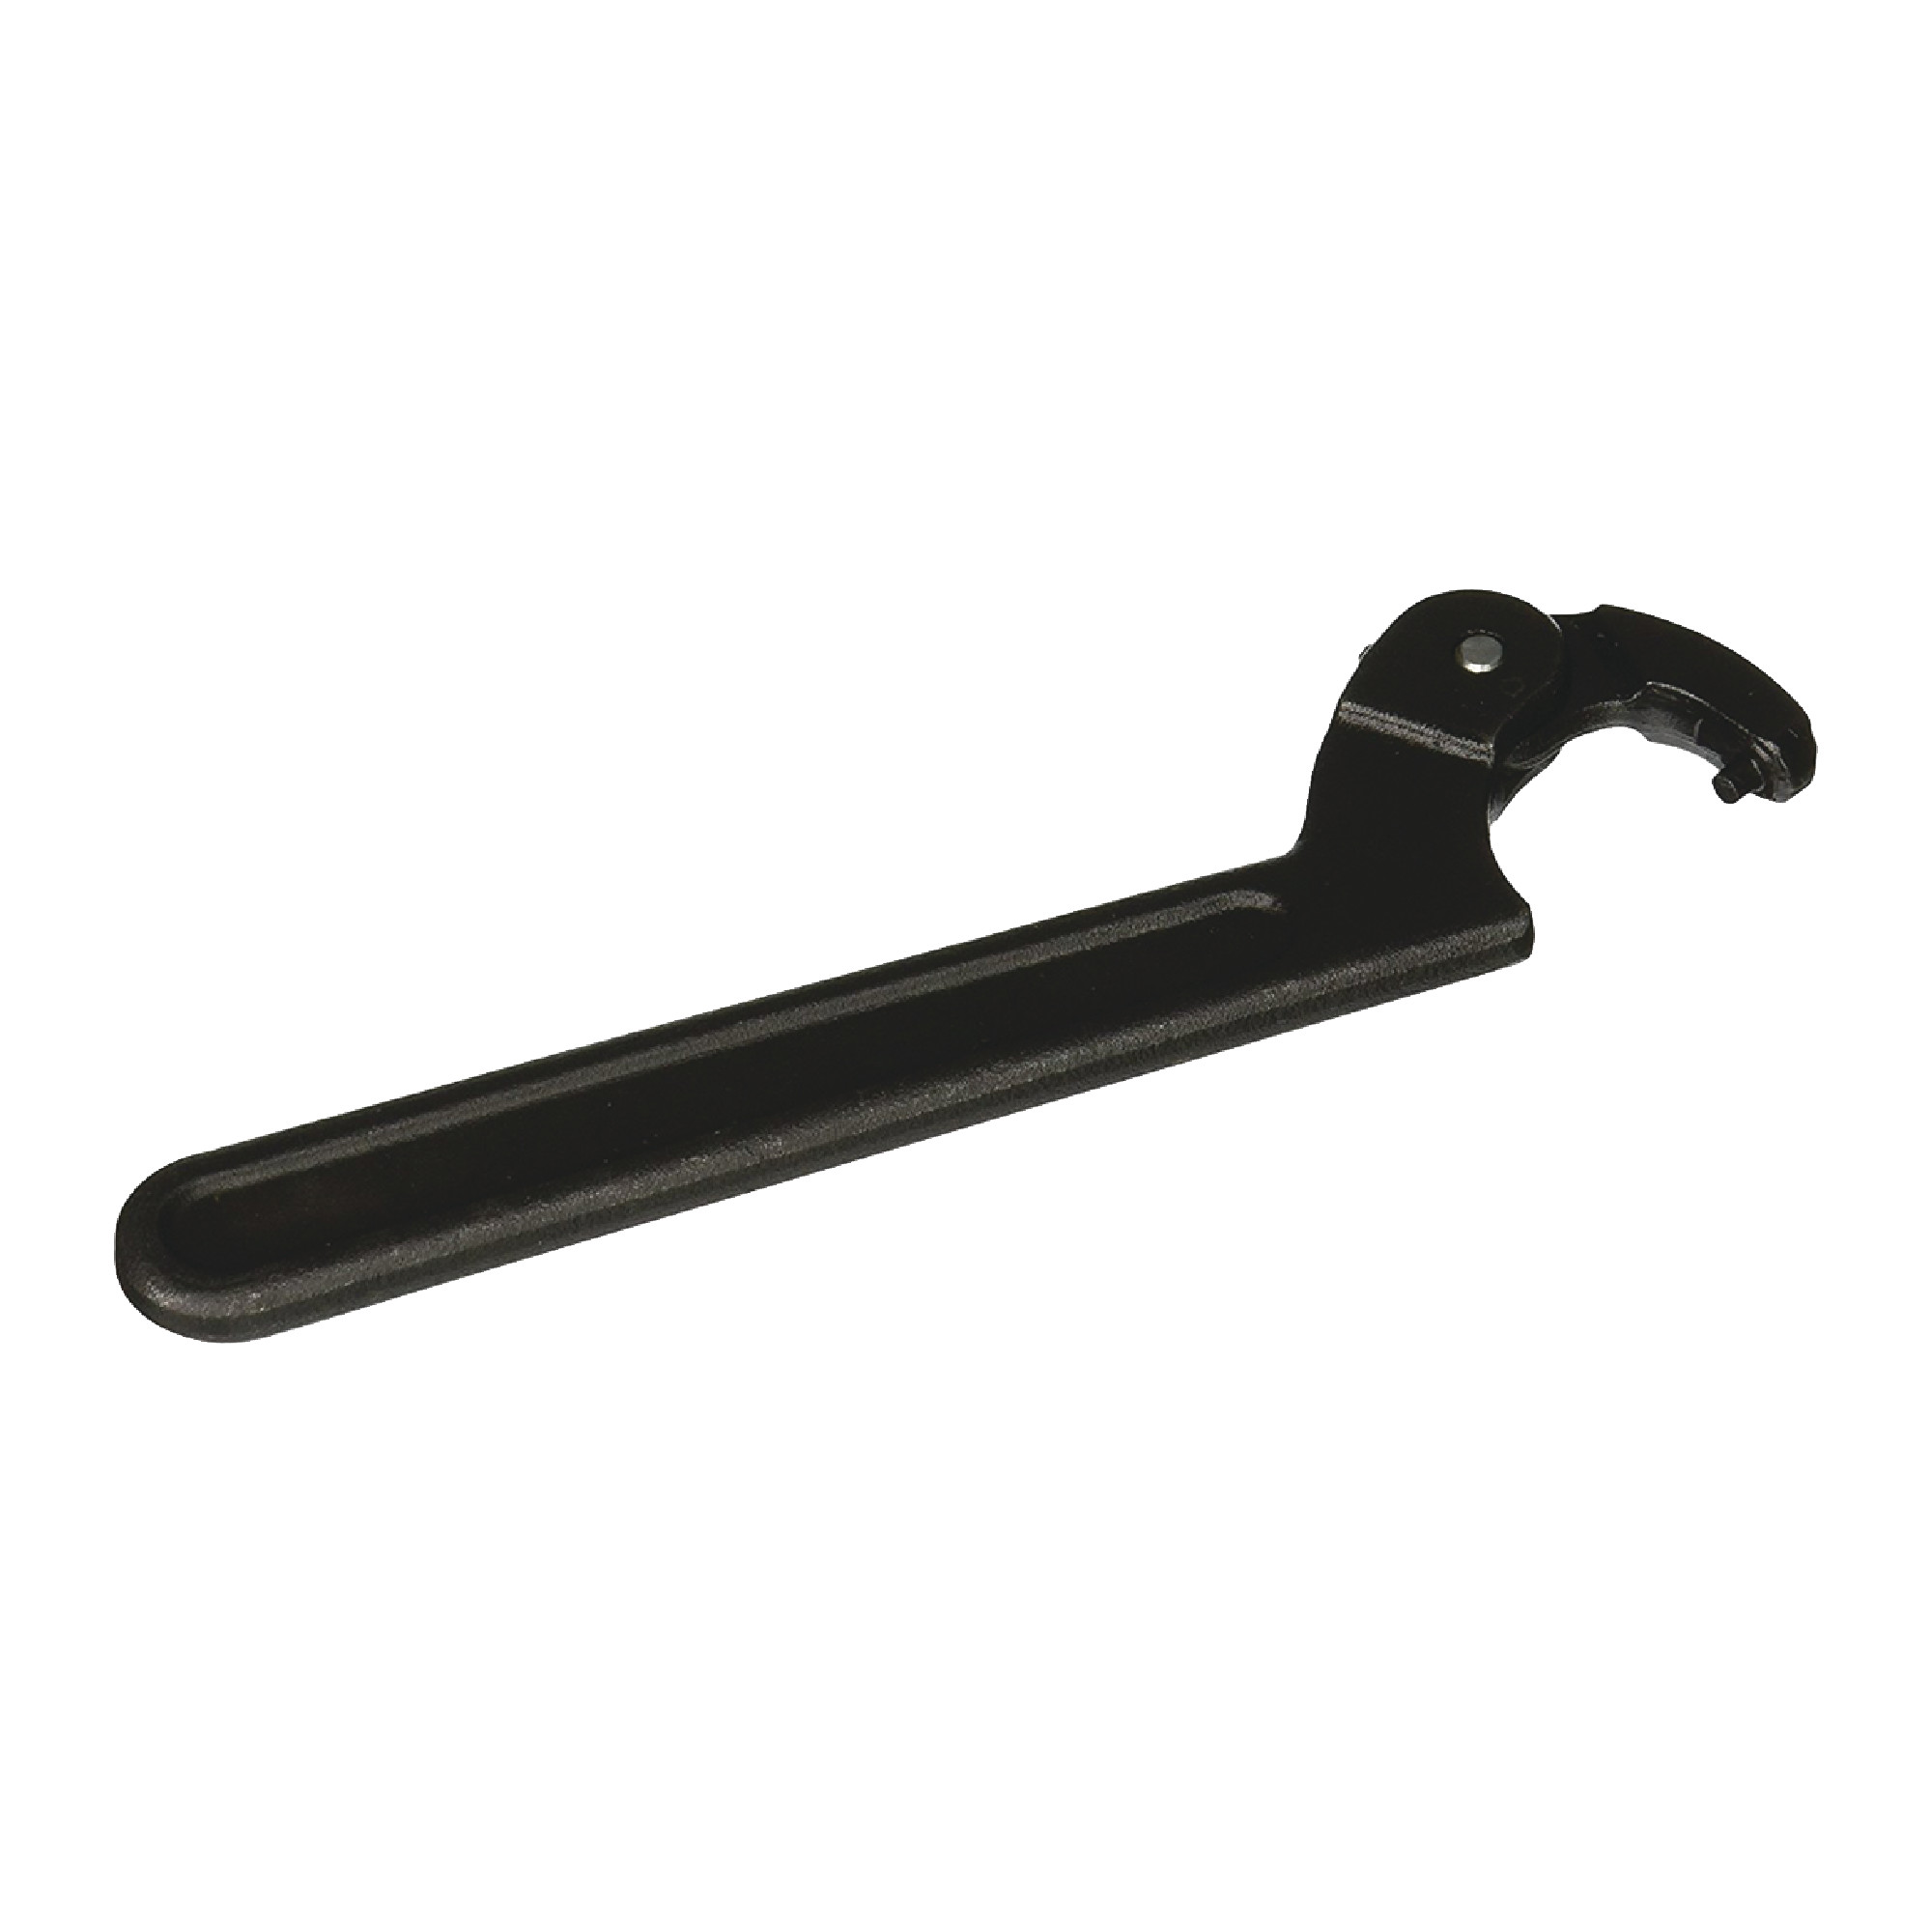 Adjustable Pin Spanner Wrench - Model: O-472  Diameter: 1-1/4" - 3"  Overall Length: 6-7/8"